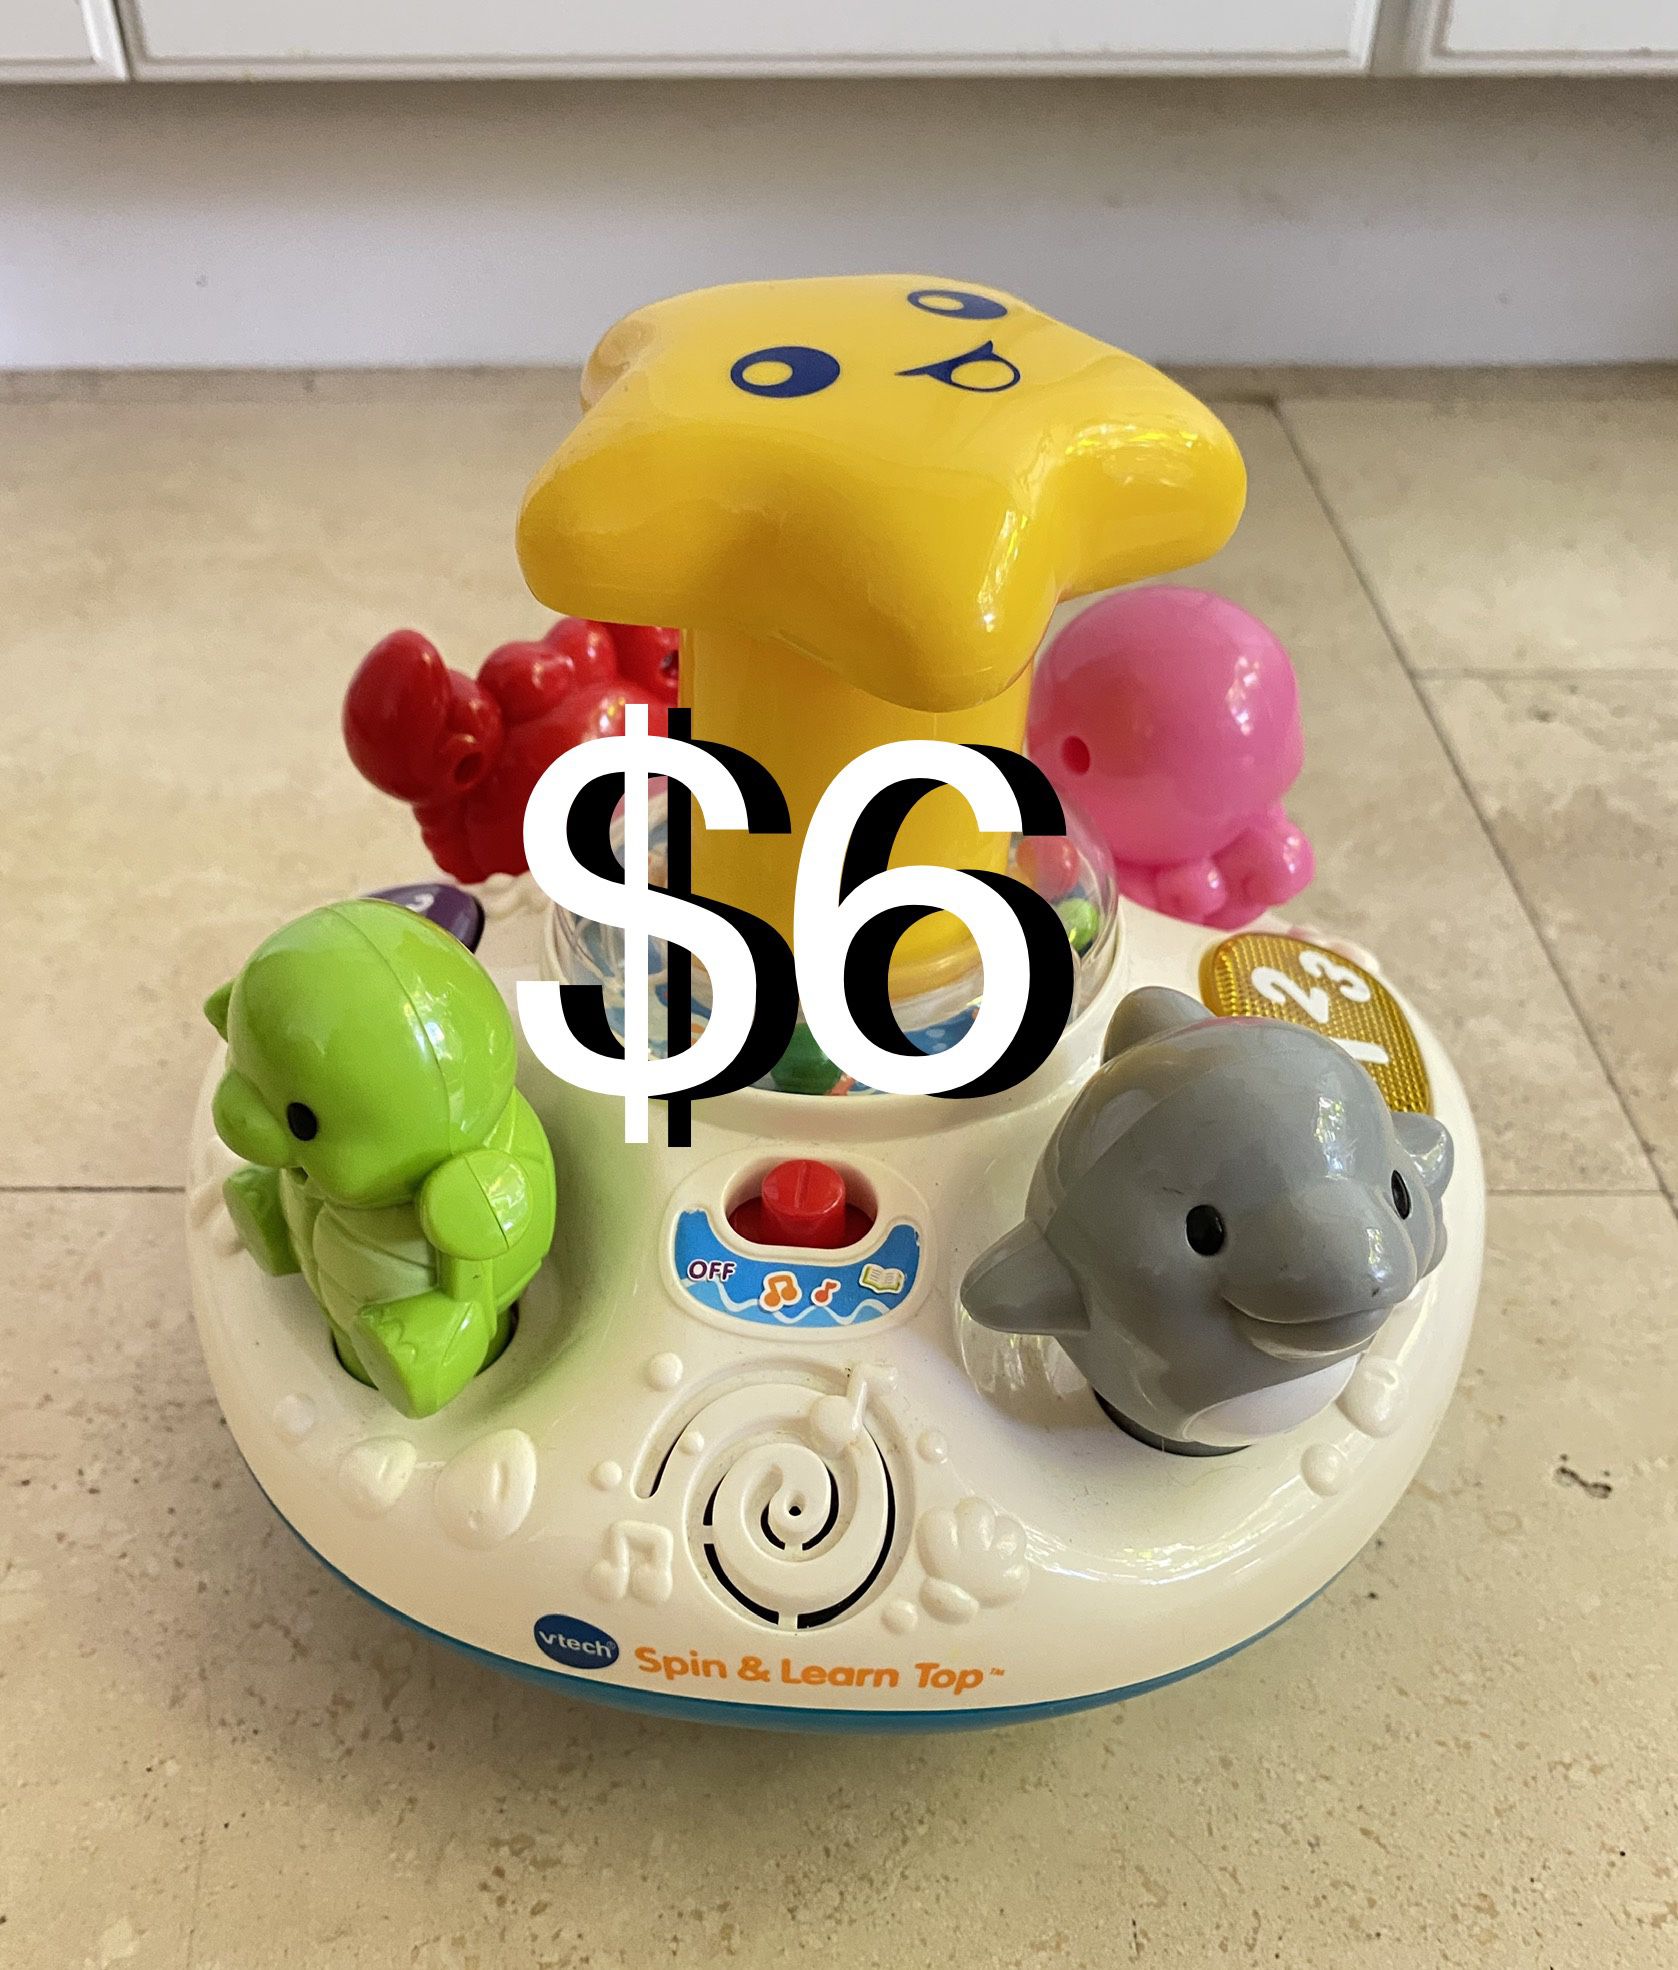 $6 Vtech Spin & Learn Top Educational Toy Sings and lights up